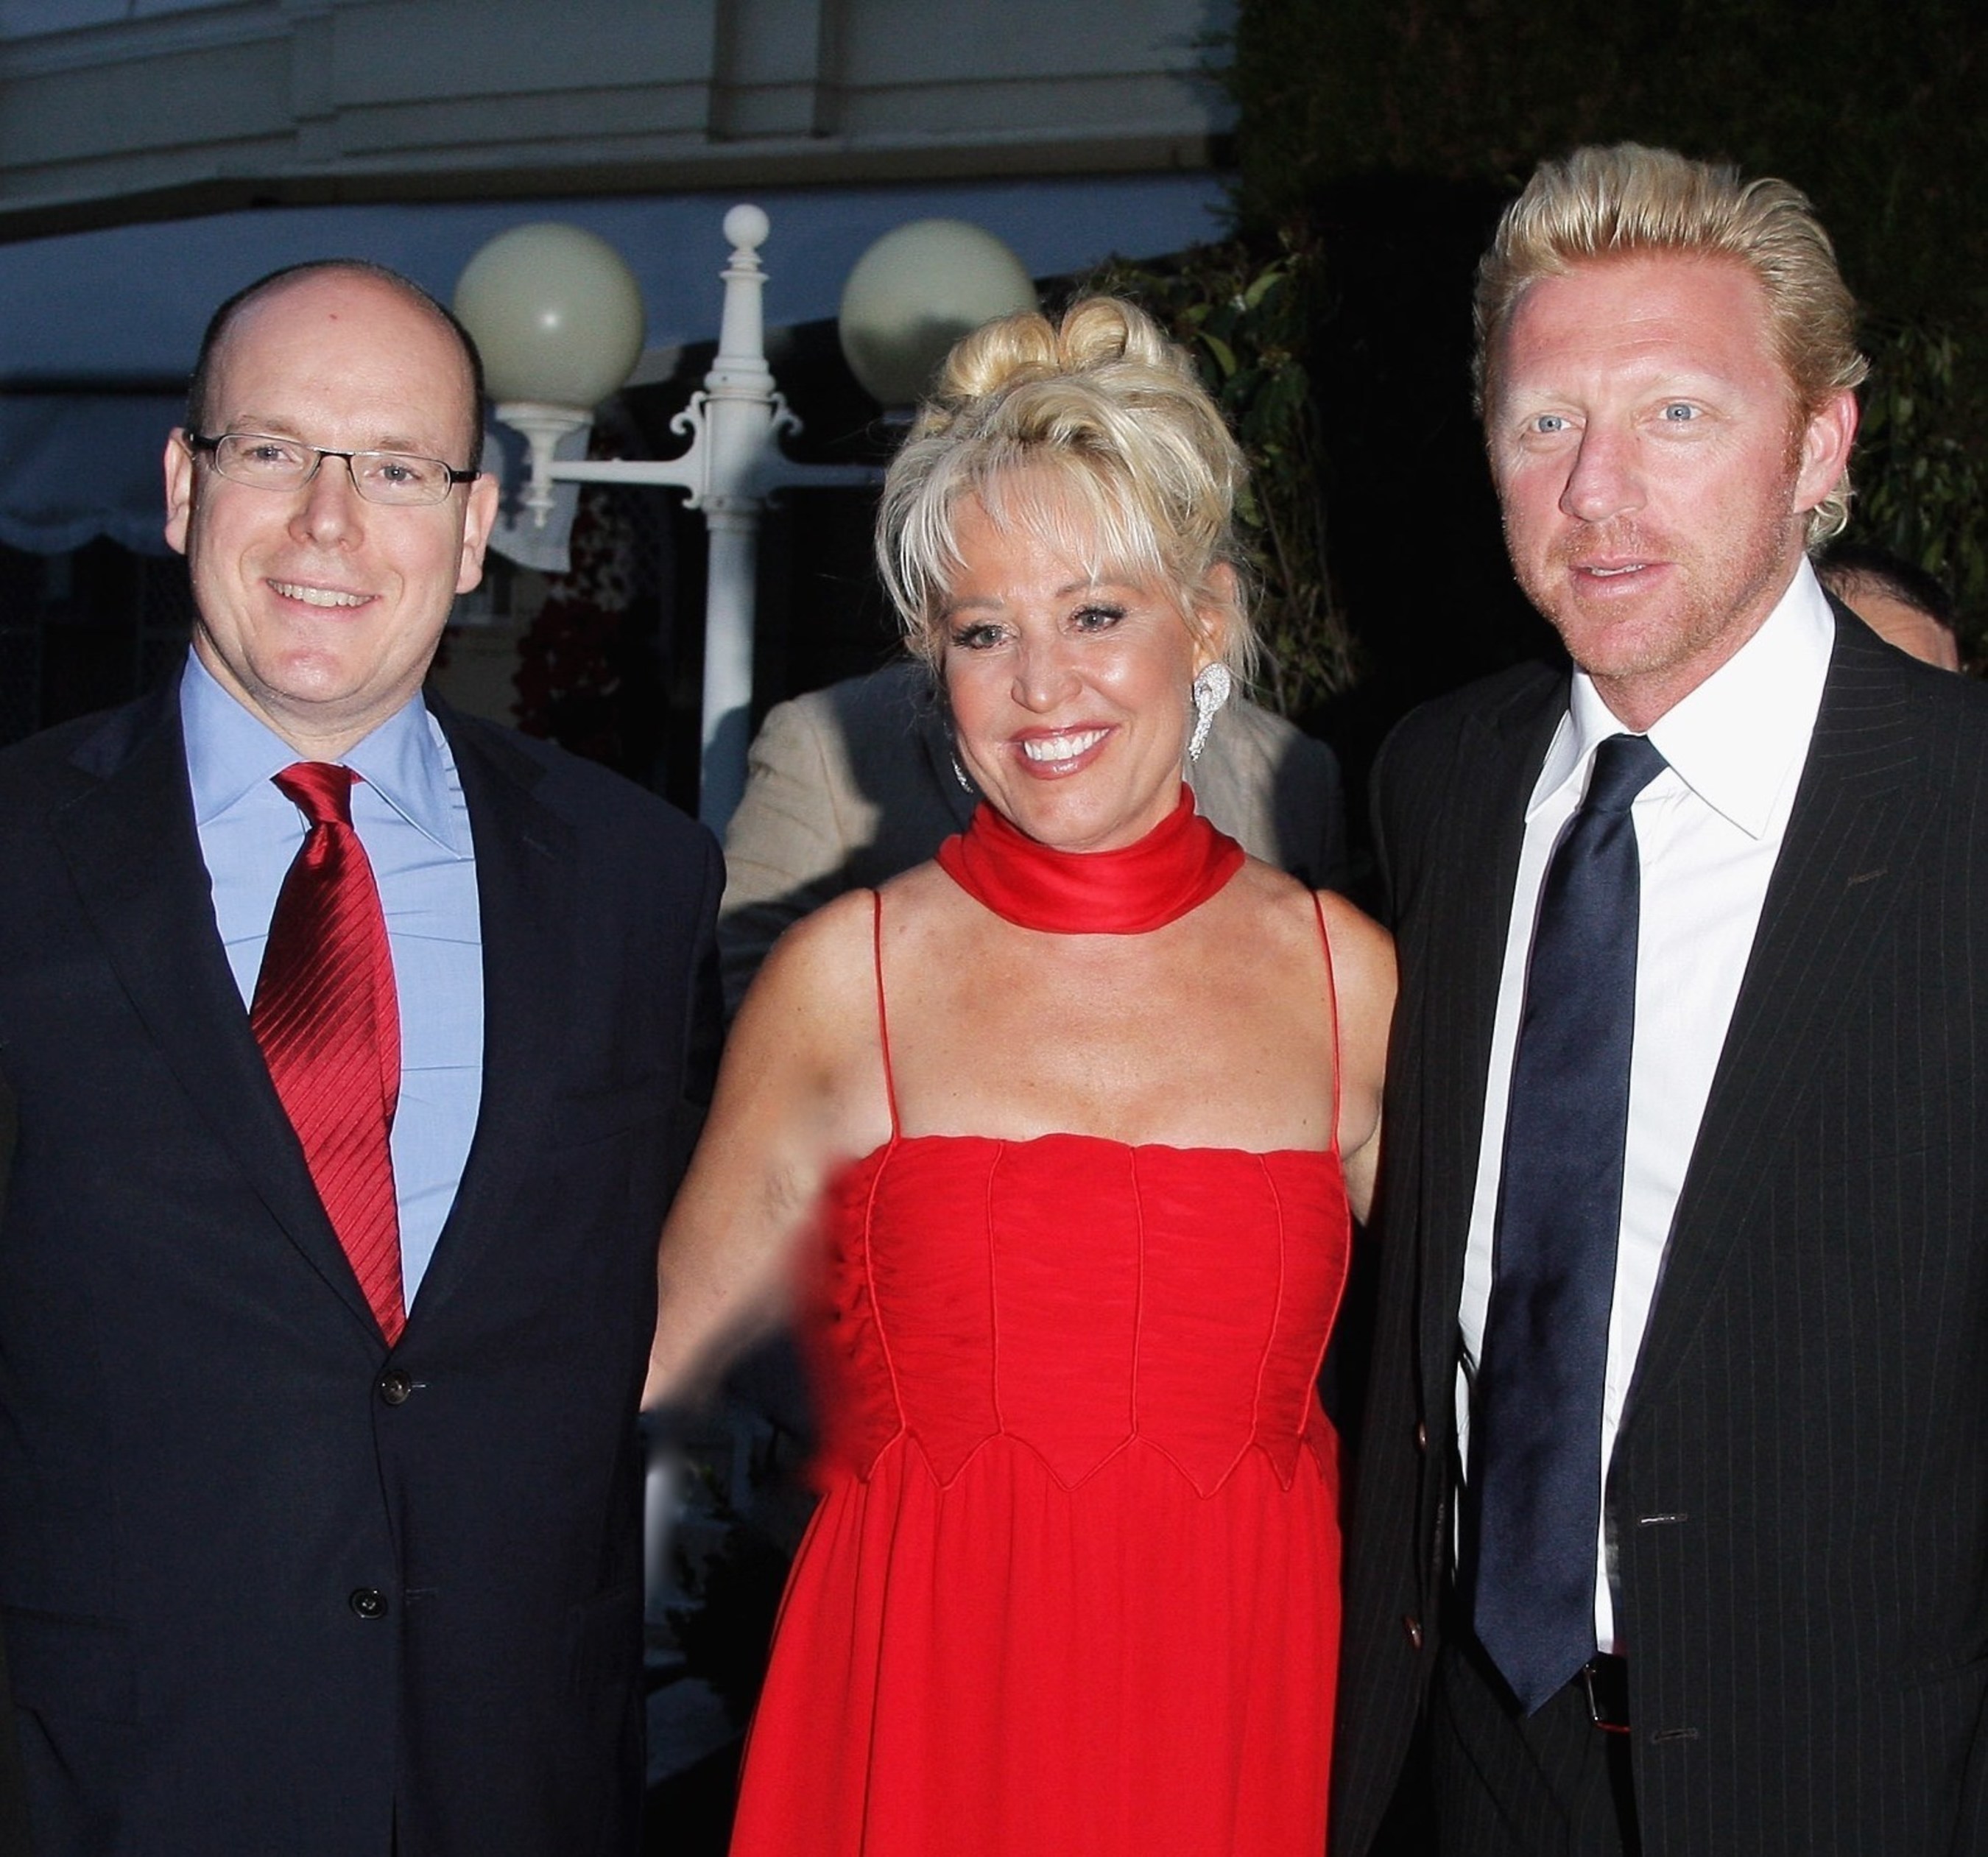 HSH Prince Albert II of Monaco with executive producer of the Better World Awards, Gina deFranco and Boris Becker attending the Better World Awards, Monte-Carlo at the Hotel de Paris.